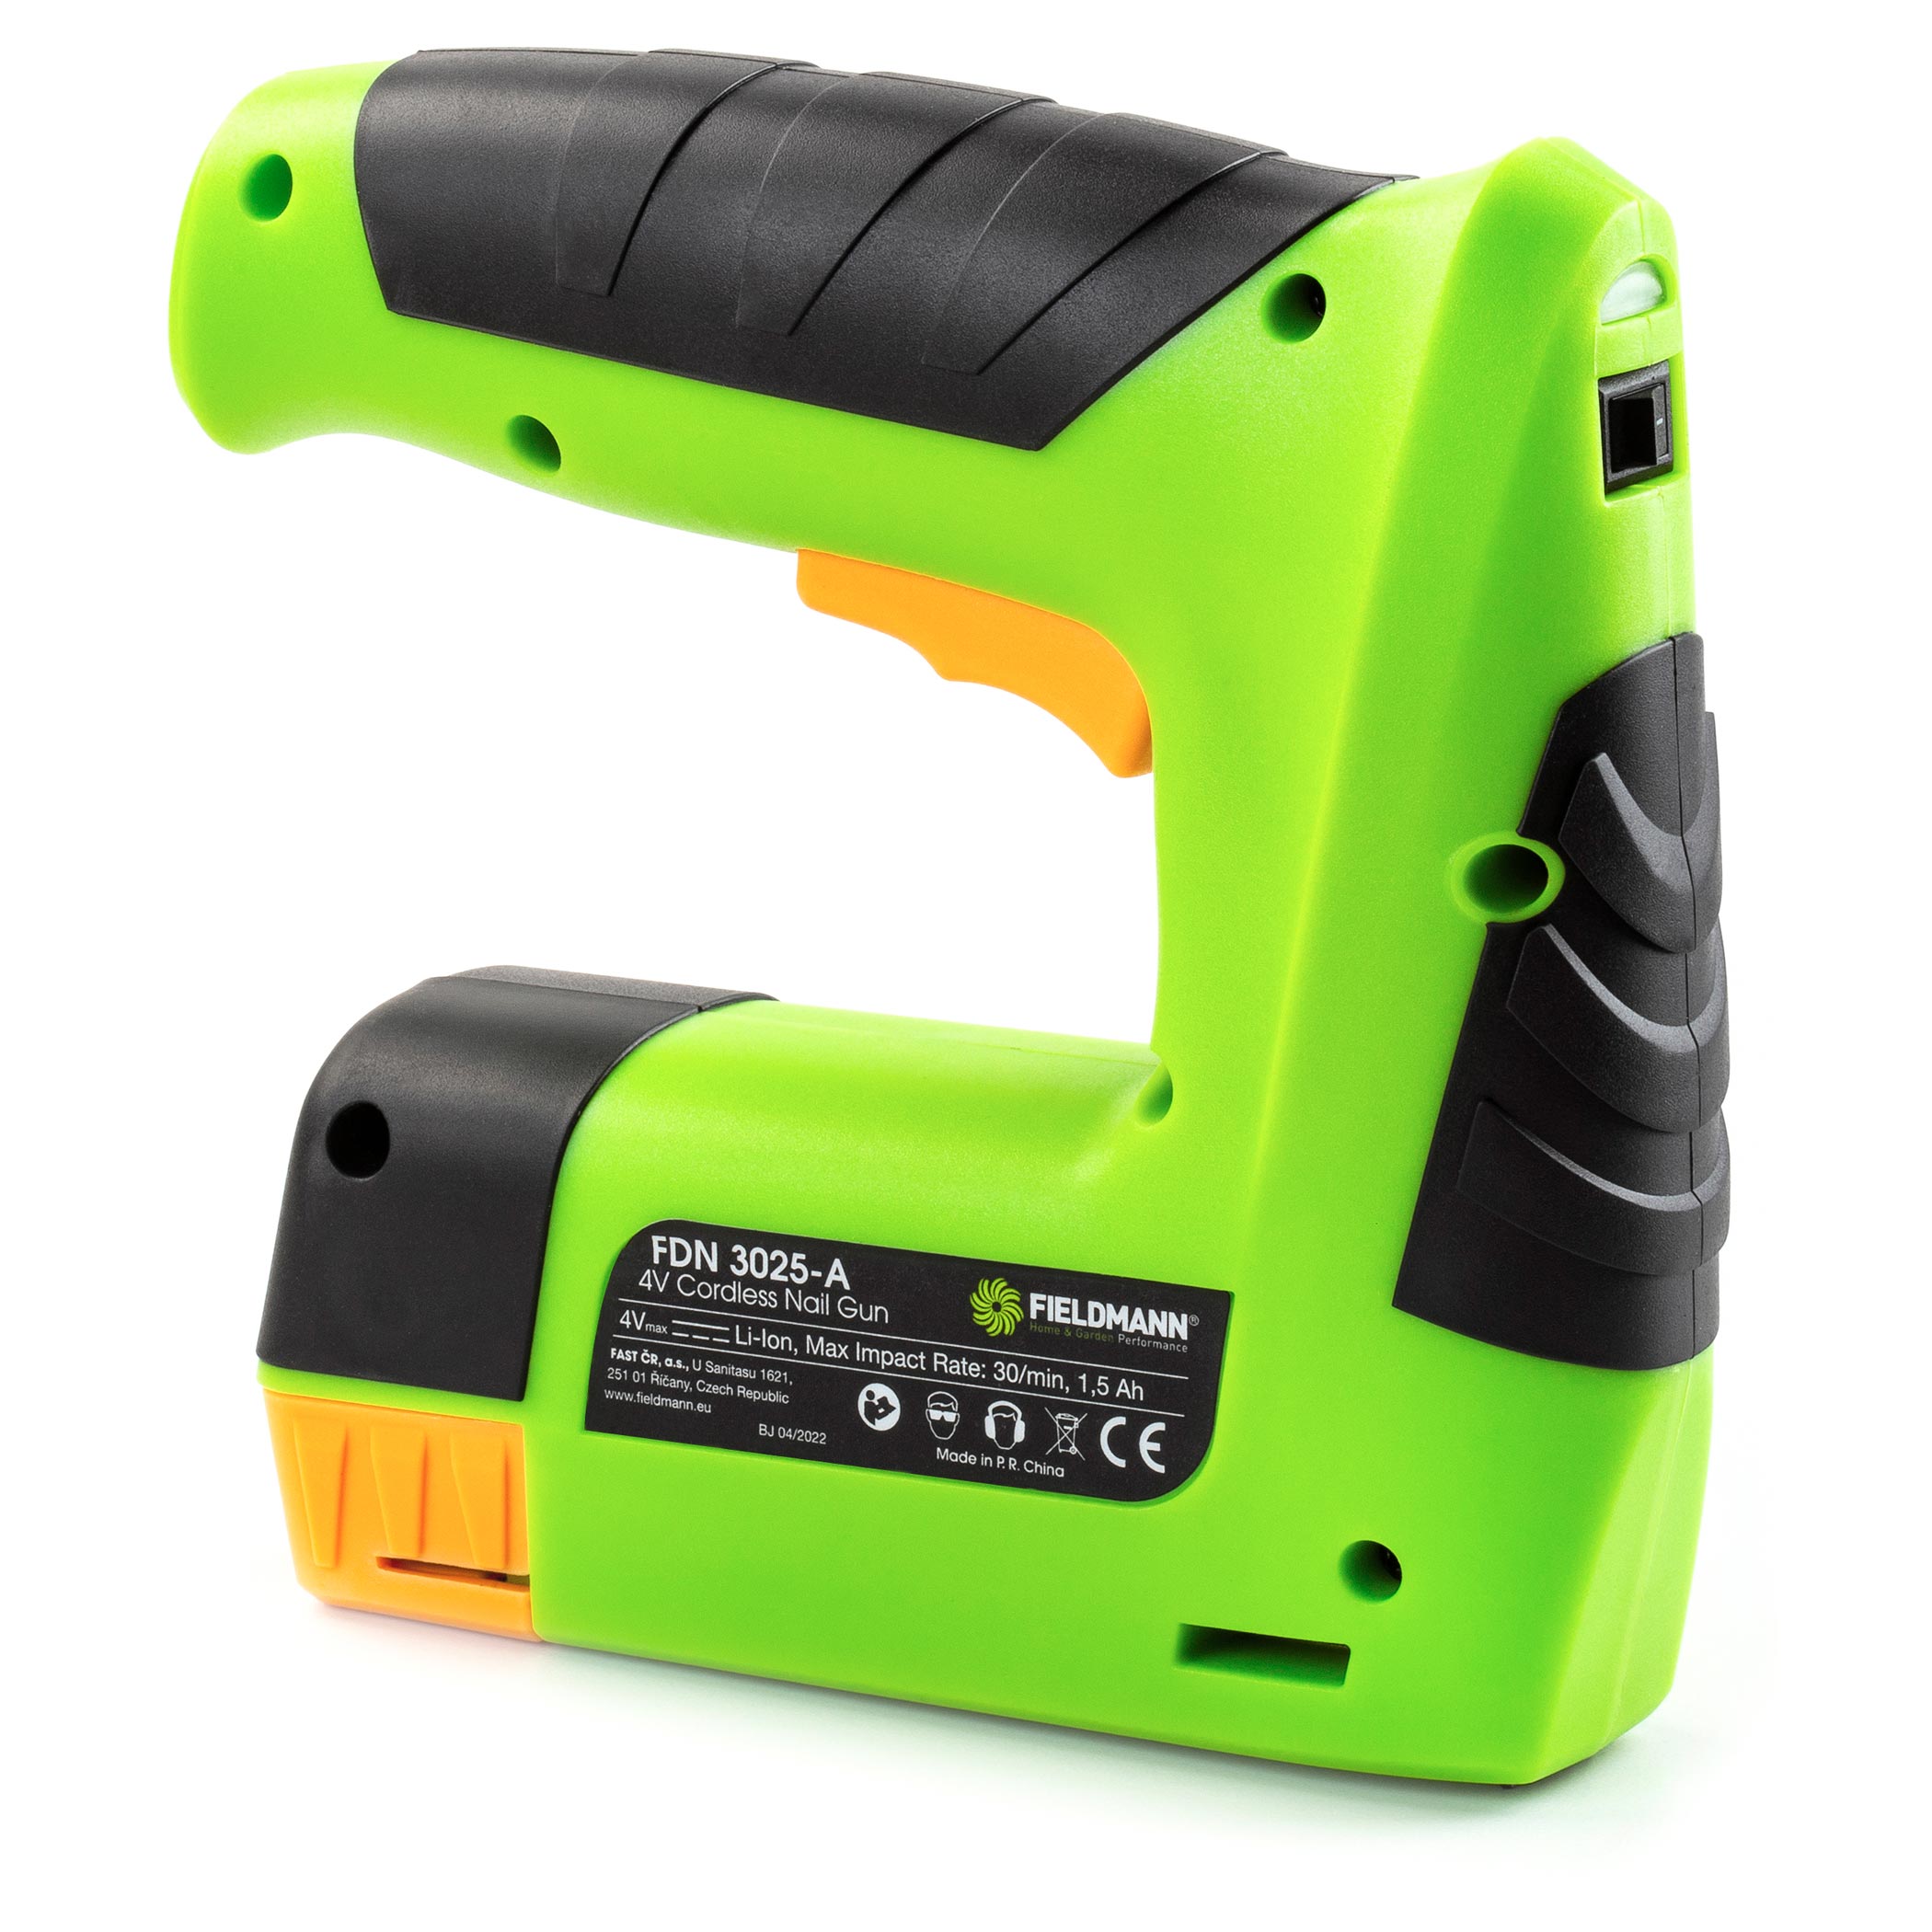 Amazon.com: 20V 18 Gauge Cordless Brad Nailer, Battery Powered Nail Gun, 2  in 1 Dual Mode Stapler Gun Comes with 2AH Lithium Battery*2 and Fast  Charger, Compatible with 18GA Nails for Woodworking,